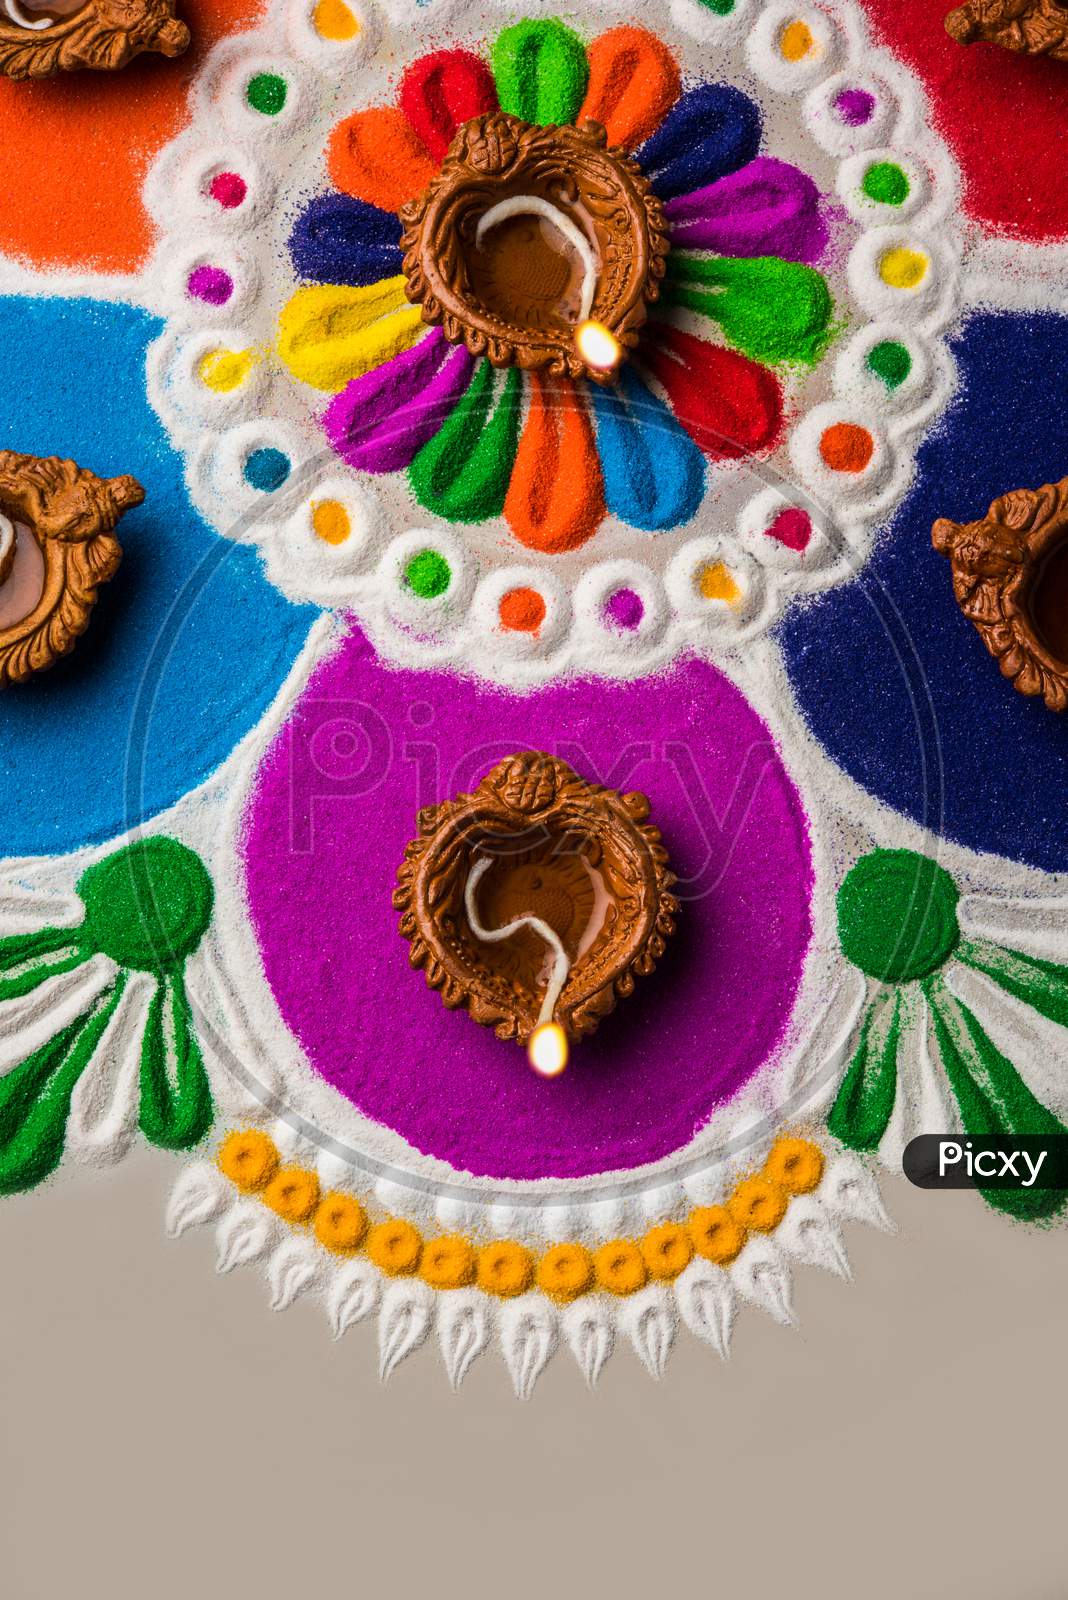 Image of Rangoli Design Made With Colourful Powder For Diwali ...